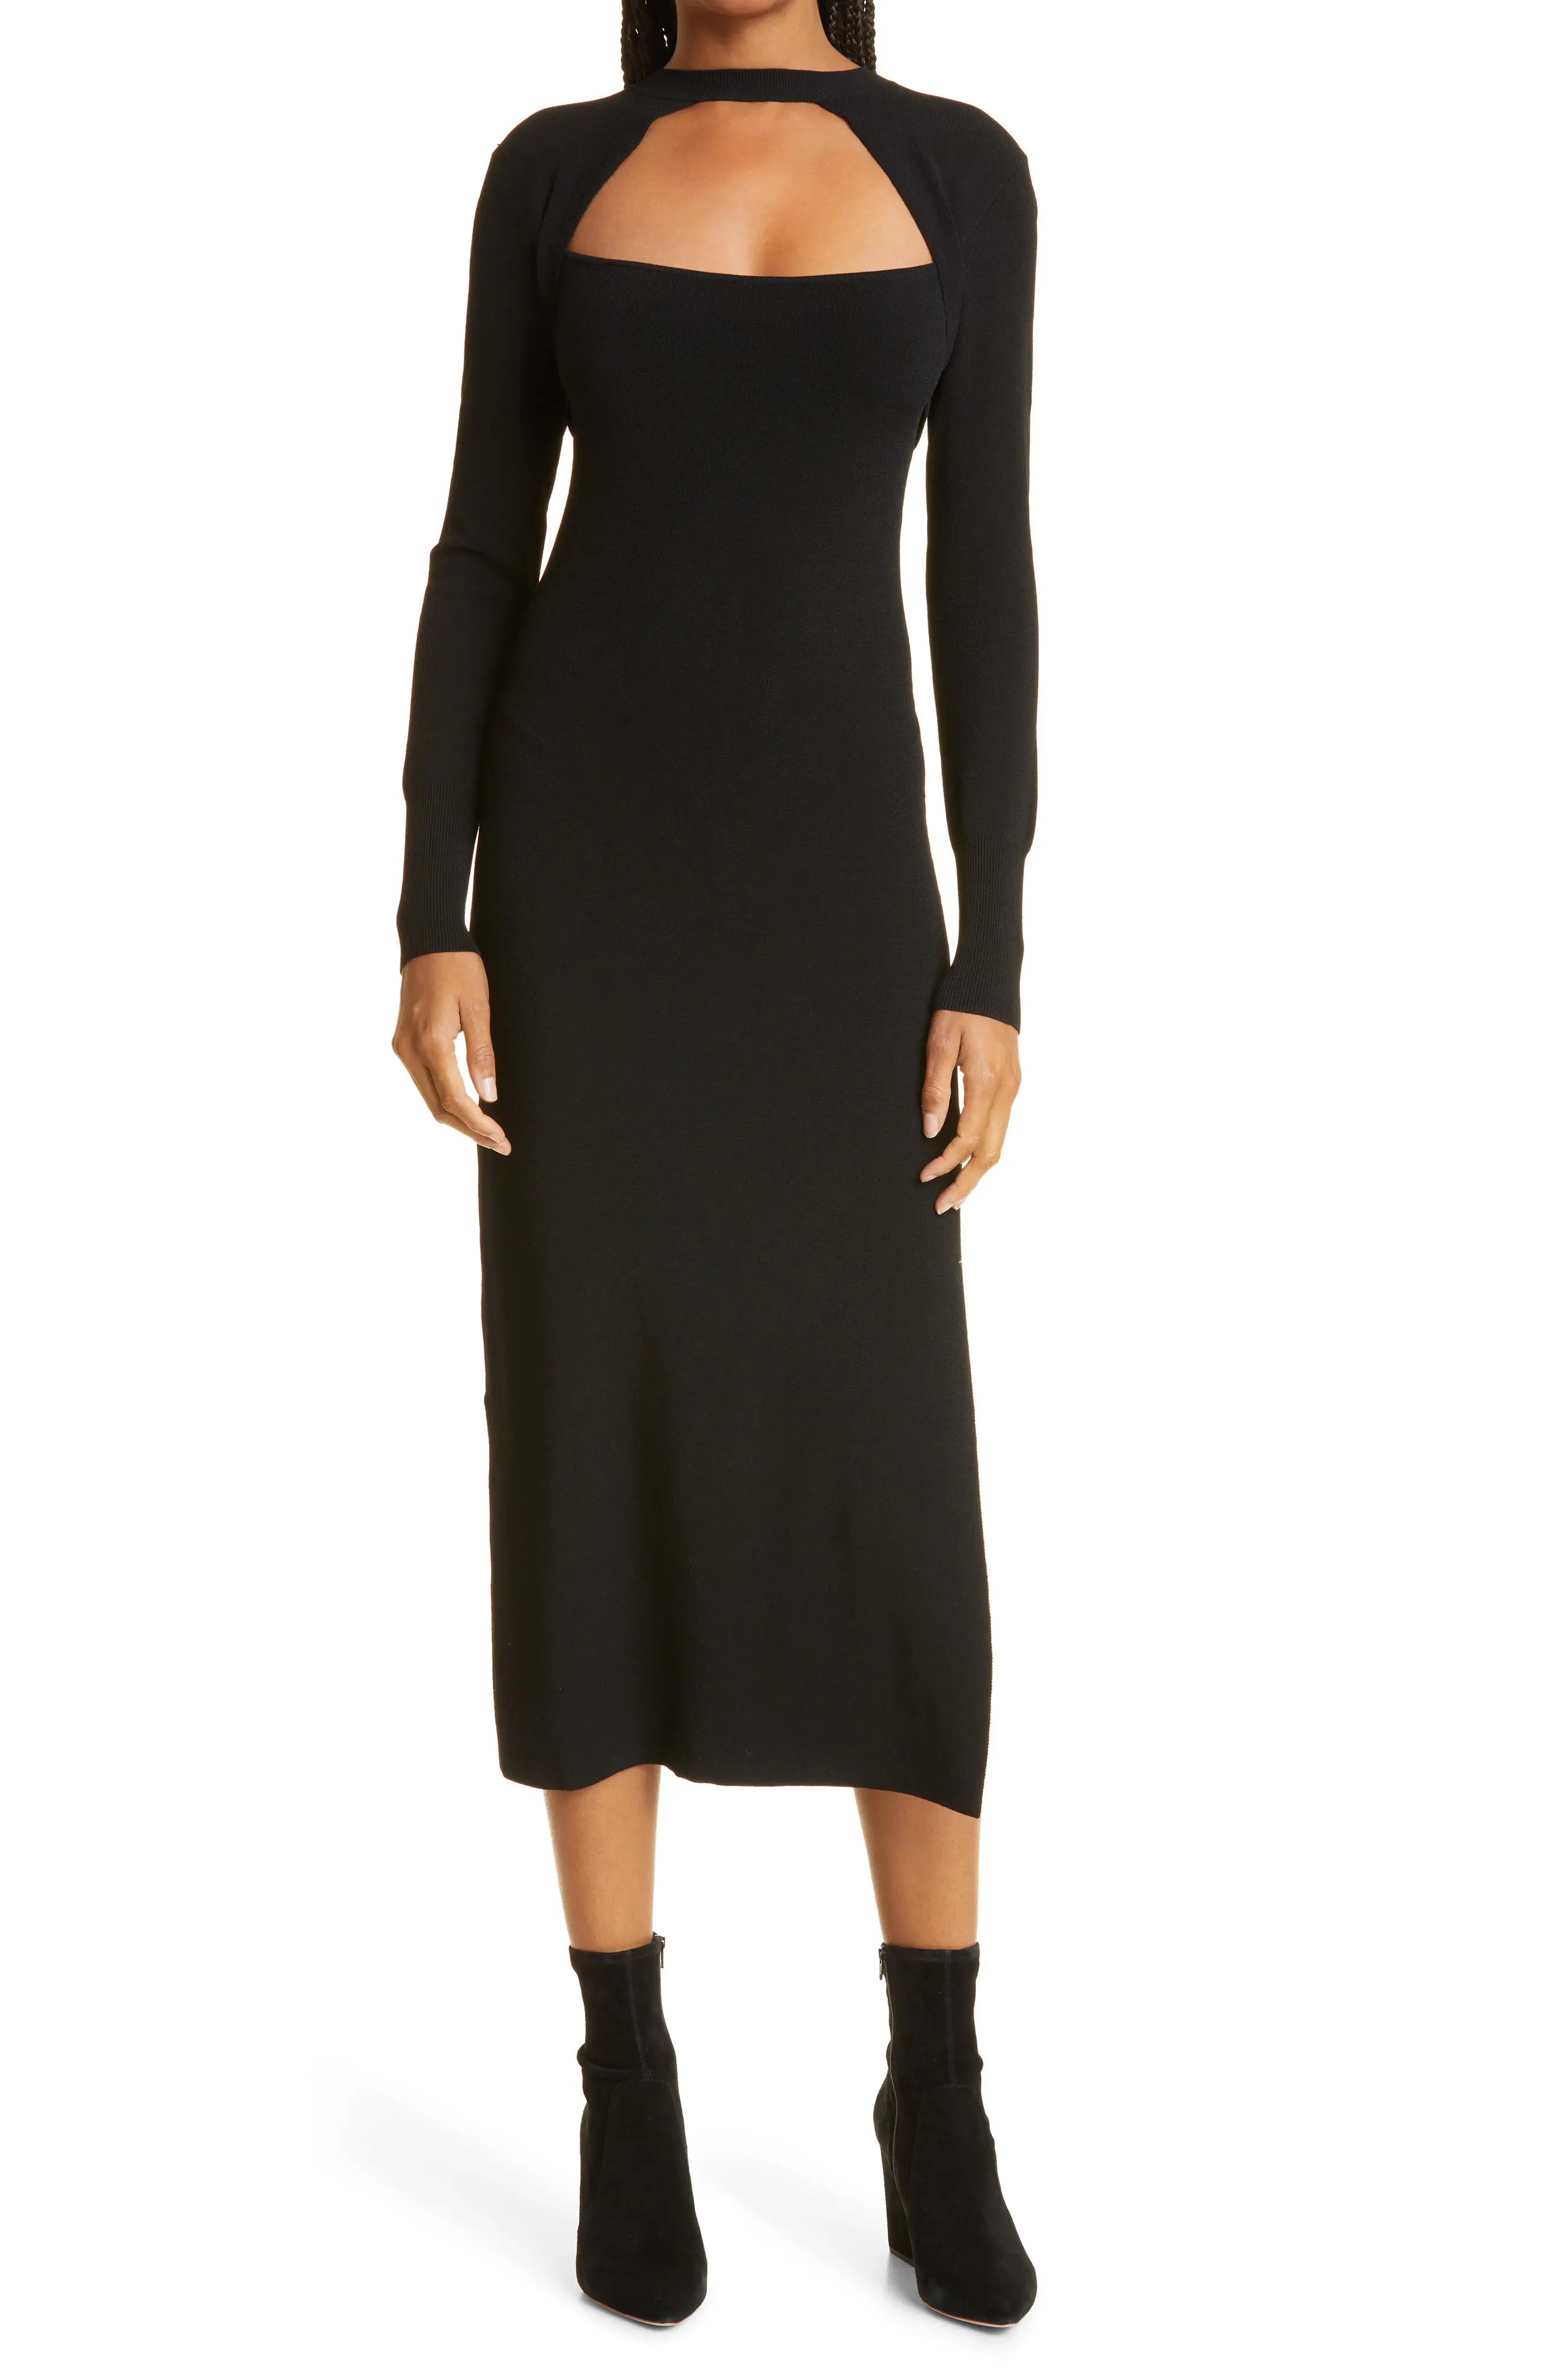 FRAME Cutout Sweater Dress, Size X-Large in Noir at Nordstrom | Nordstrom